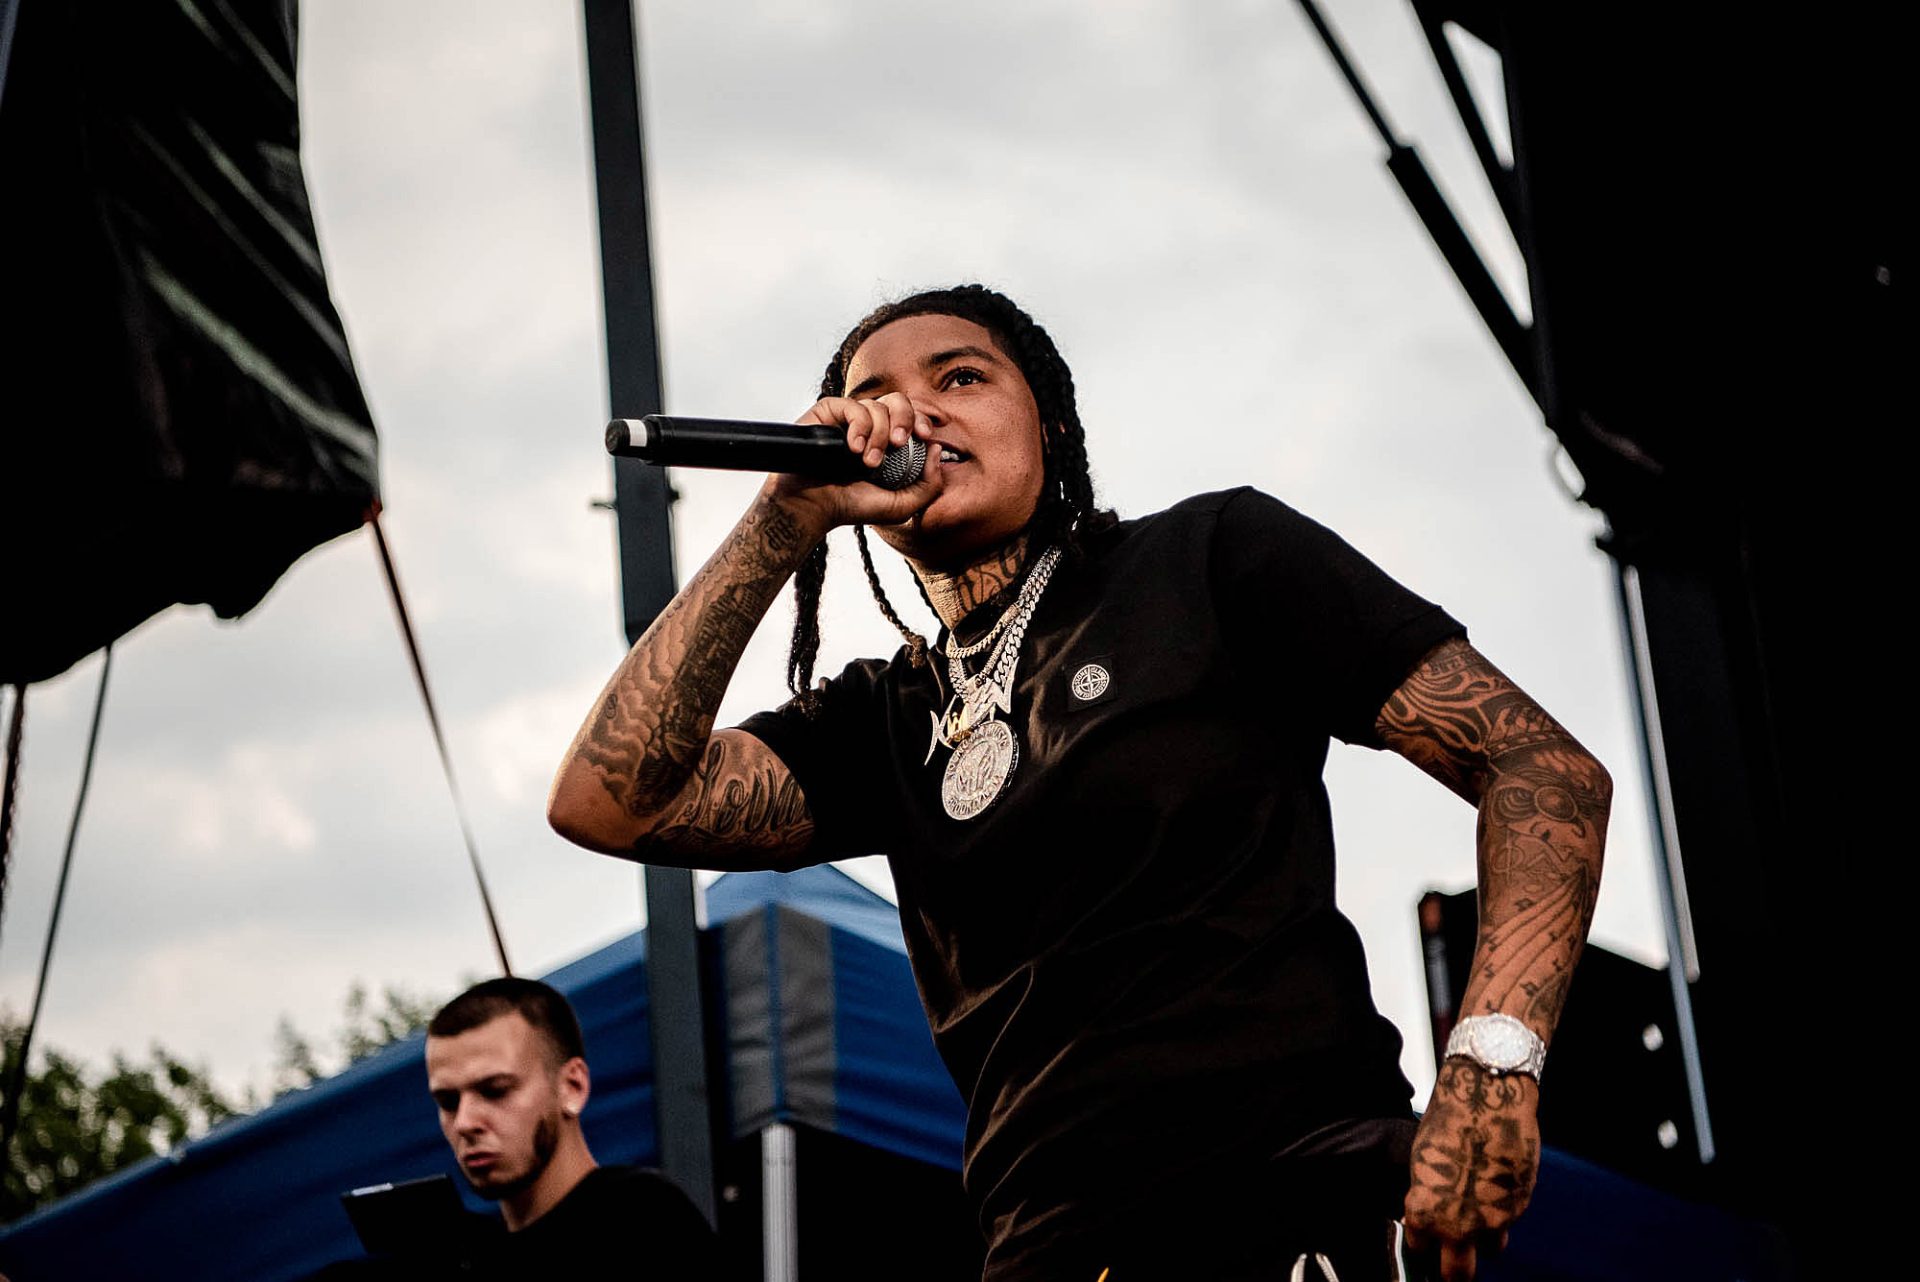 Young M.A at SummerStage in Betsy Head Park